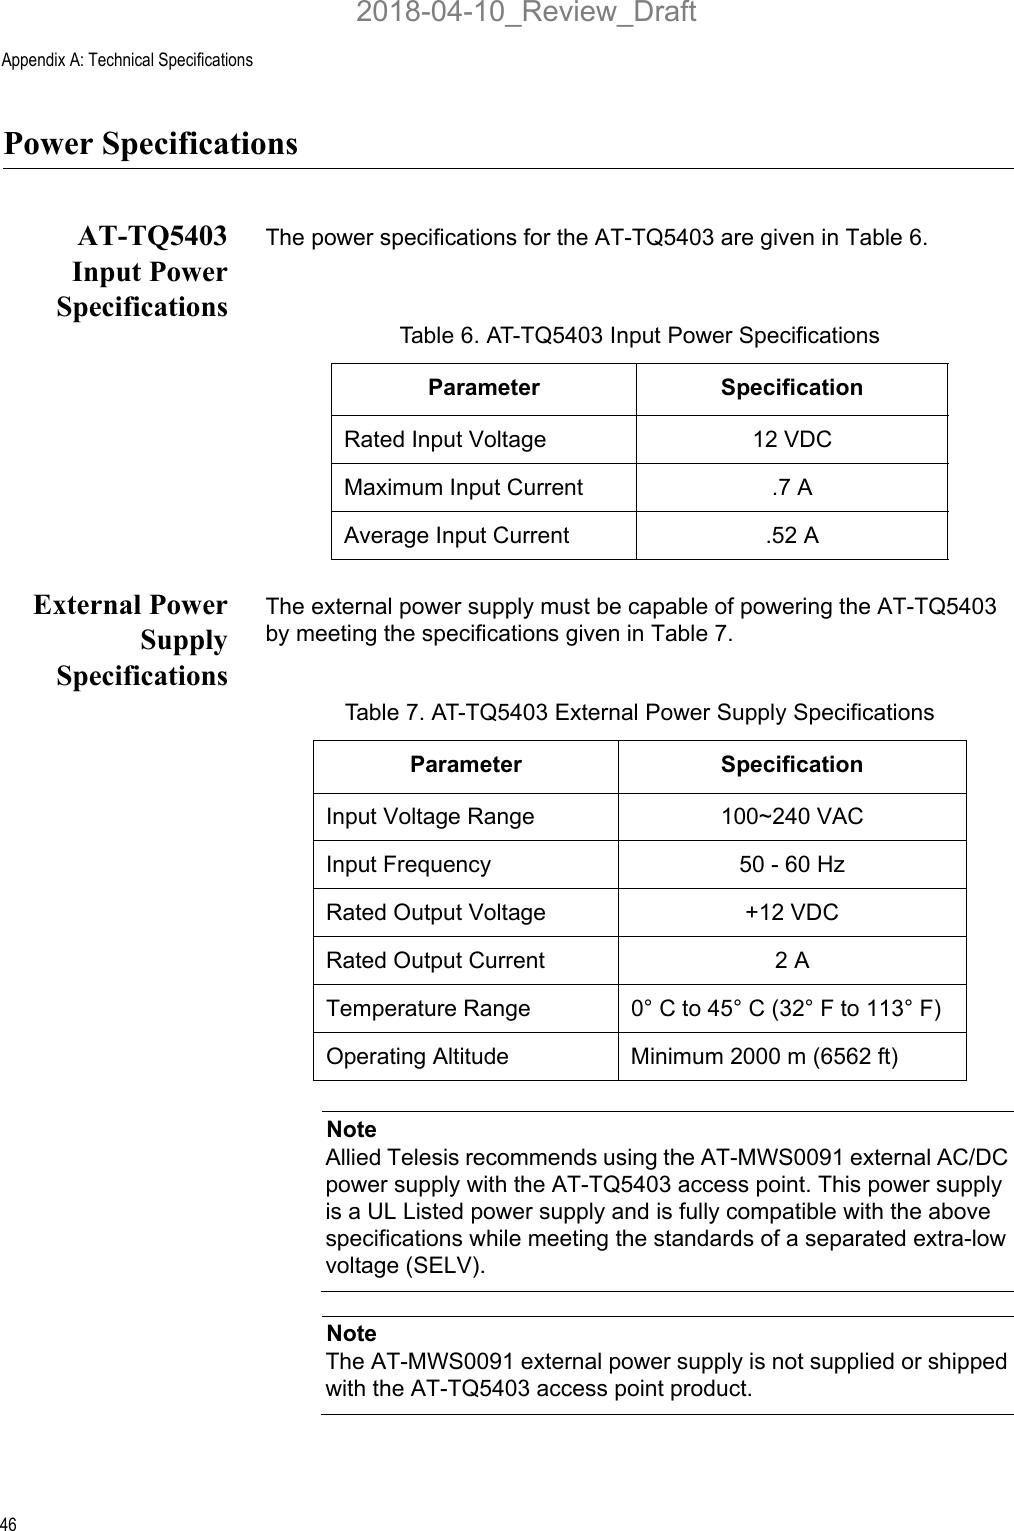 Appendix A: Technical Specifications46Power SpecificationsAT-TQ5403Input PowerSpecificationsThe power specifications for the AT-TQ5403 are given in Table 6.External PowerSupplySpecificationsThe external power supply must be capable of powering the AT-TQ5403 by meeting the specifications given in Table 7.NoteAllied Telesis recommends using the AT-MWS0091 external AC/DC power supply with the AT-TQ5403 access point. This power supply is a UL Listed power supply and is fully compatible with the above specifications while meeting the standards of a separated extra-low voltage (SELV). NoteThe AT-MWS0091 external power supply is not supplied or shipped with the AT-TQ5403 access point product. Table 6. AT-TQ5403 Input Power SpecificationsParameter SpecificationRated Input Voltage 12 VDCMaximum Input Current .7 AAverage Input Current .52 ATable 7. AT-TQ5403 External Power Supply SpecificationsParameter SpecificationInput Voltage Range 100~240 VACInput Frequency 50 - 60 HzRated Output Voltage +12 VDCRated Output Current 2 ATemperature Range 0° C to 45° C (32° F to 113° F)Operating Altitude  Minimum 2000 m (6562 ft)2018-04-10_Review_Draft